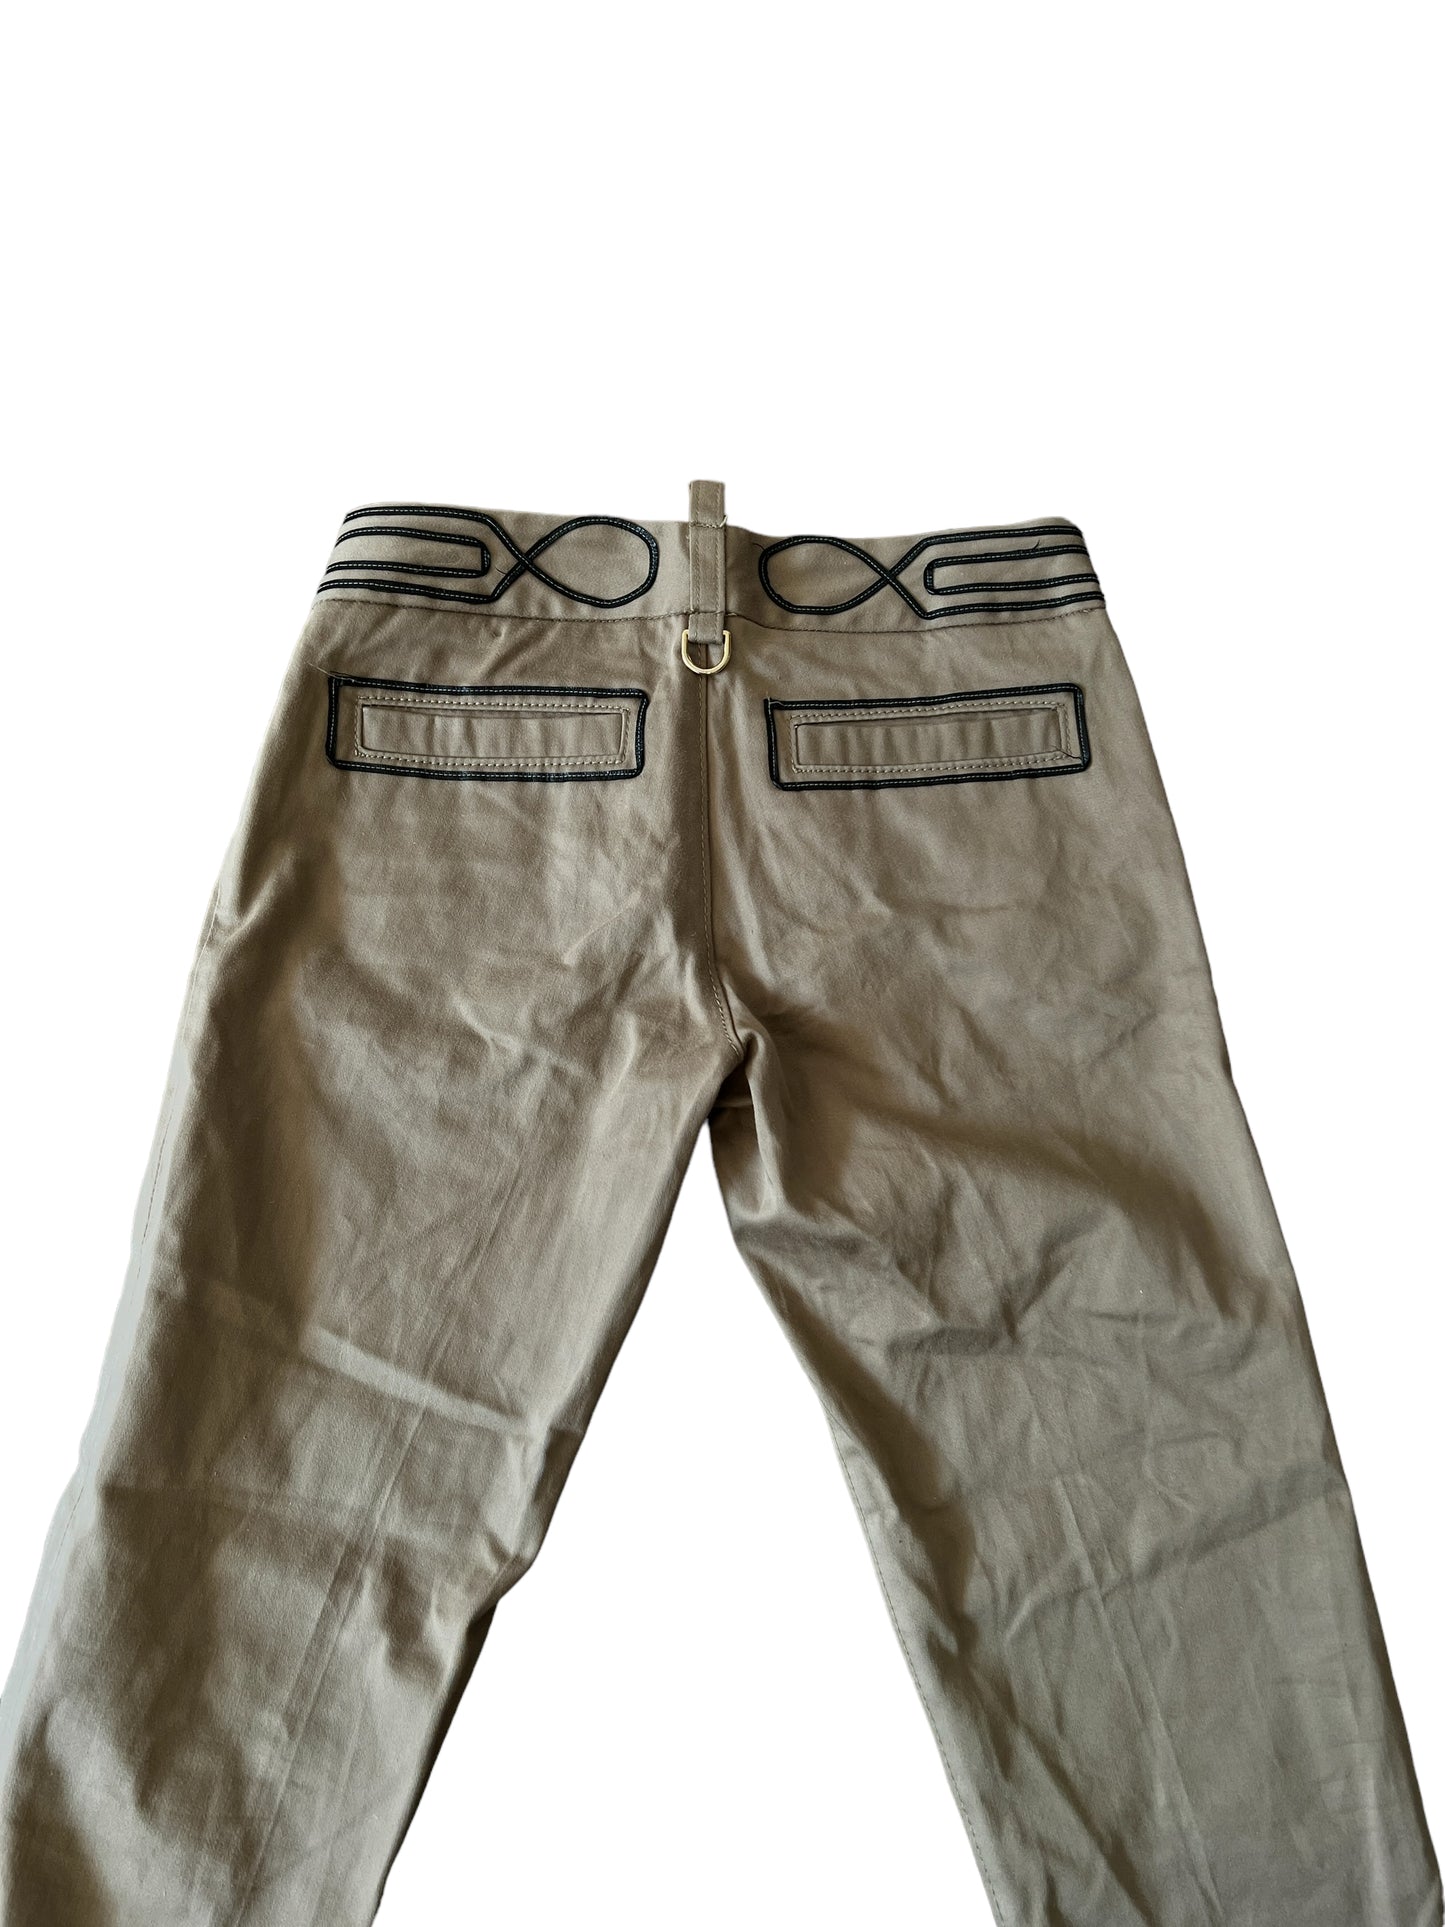 2000s Dsquared2 Embroidered Khaki Pants